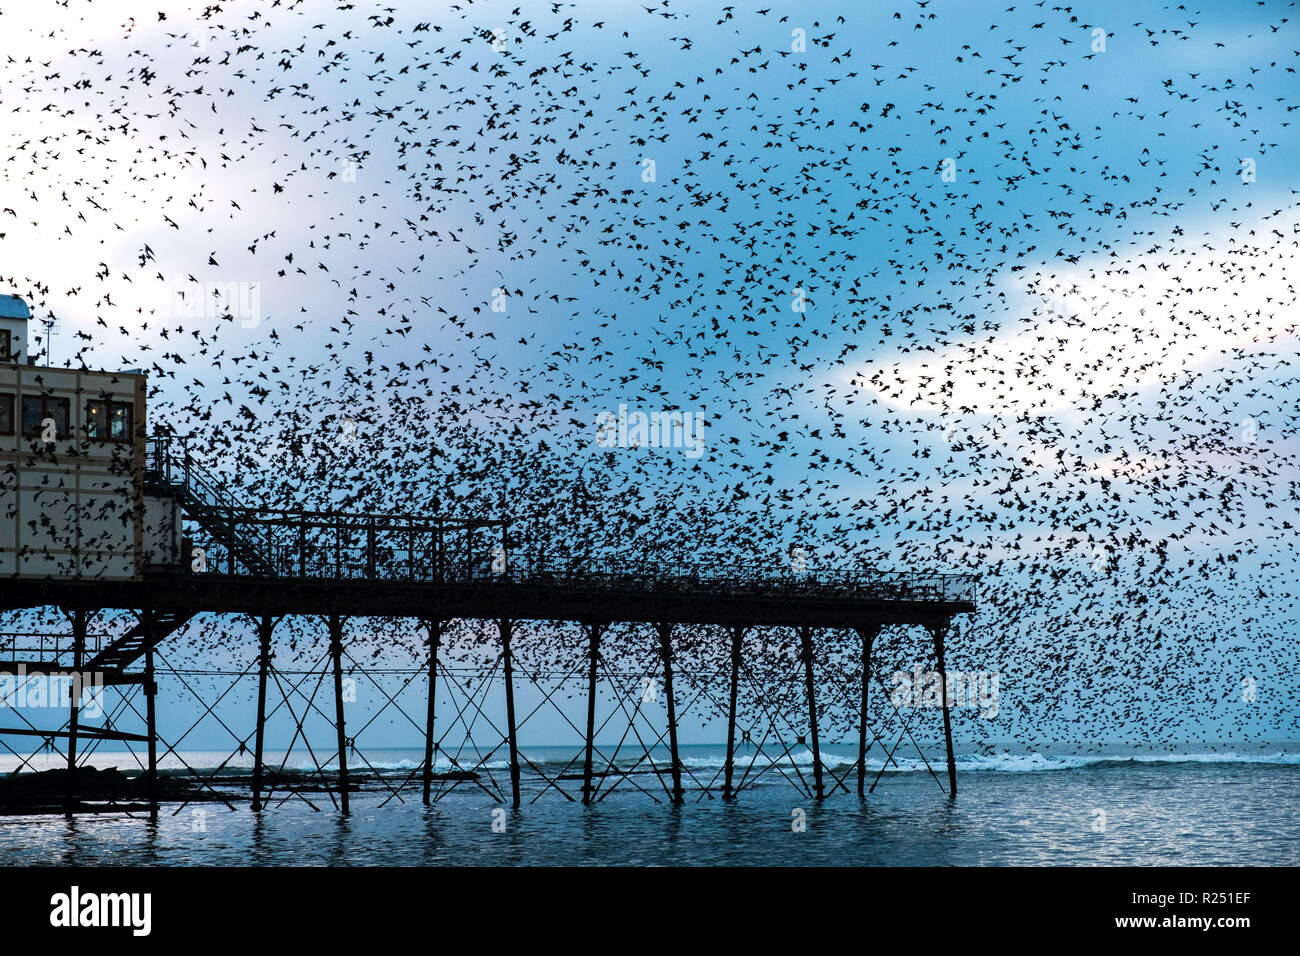 Aberystwyth Wales UK, 16th Nov 2018.  UK Weather: Tens  of thousands of starlings fill the sky as they perform their nightly balletic ‘murmurations’ before swooping down to roost noisily for the night on the forest  of cast iron legs underneath the Aberystwyth’s Victorian seaside pier. Aberystwyth is one of the few urban roosts in the country and draws people from all over the UK to witness the spectacular nightly displays.  photo credit: Keith Morris / Alamy Live News Stock Photo